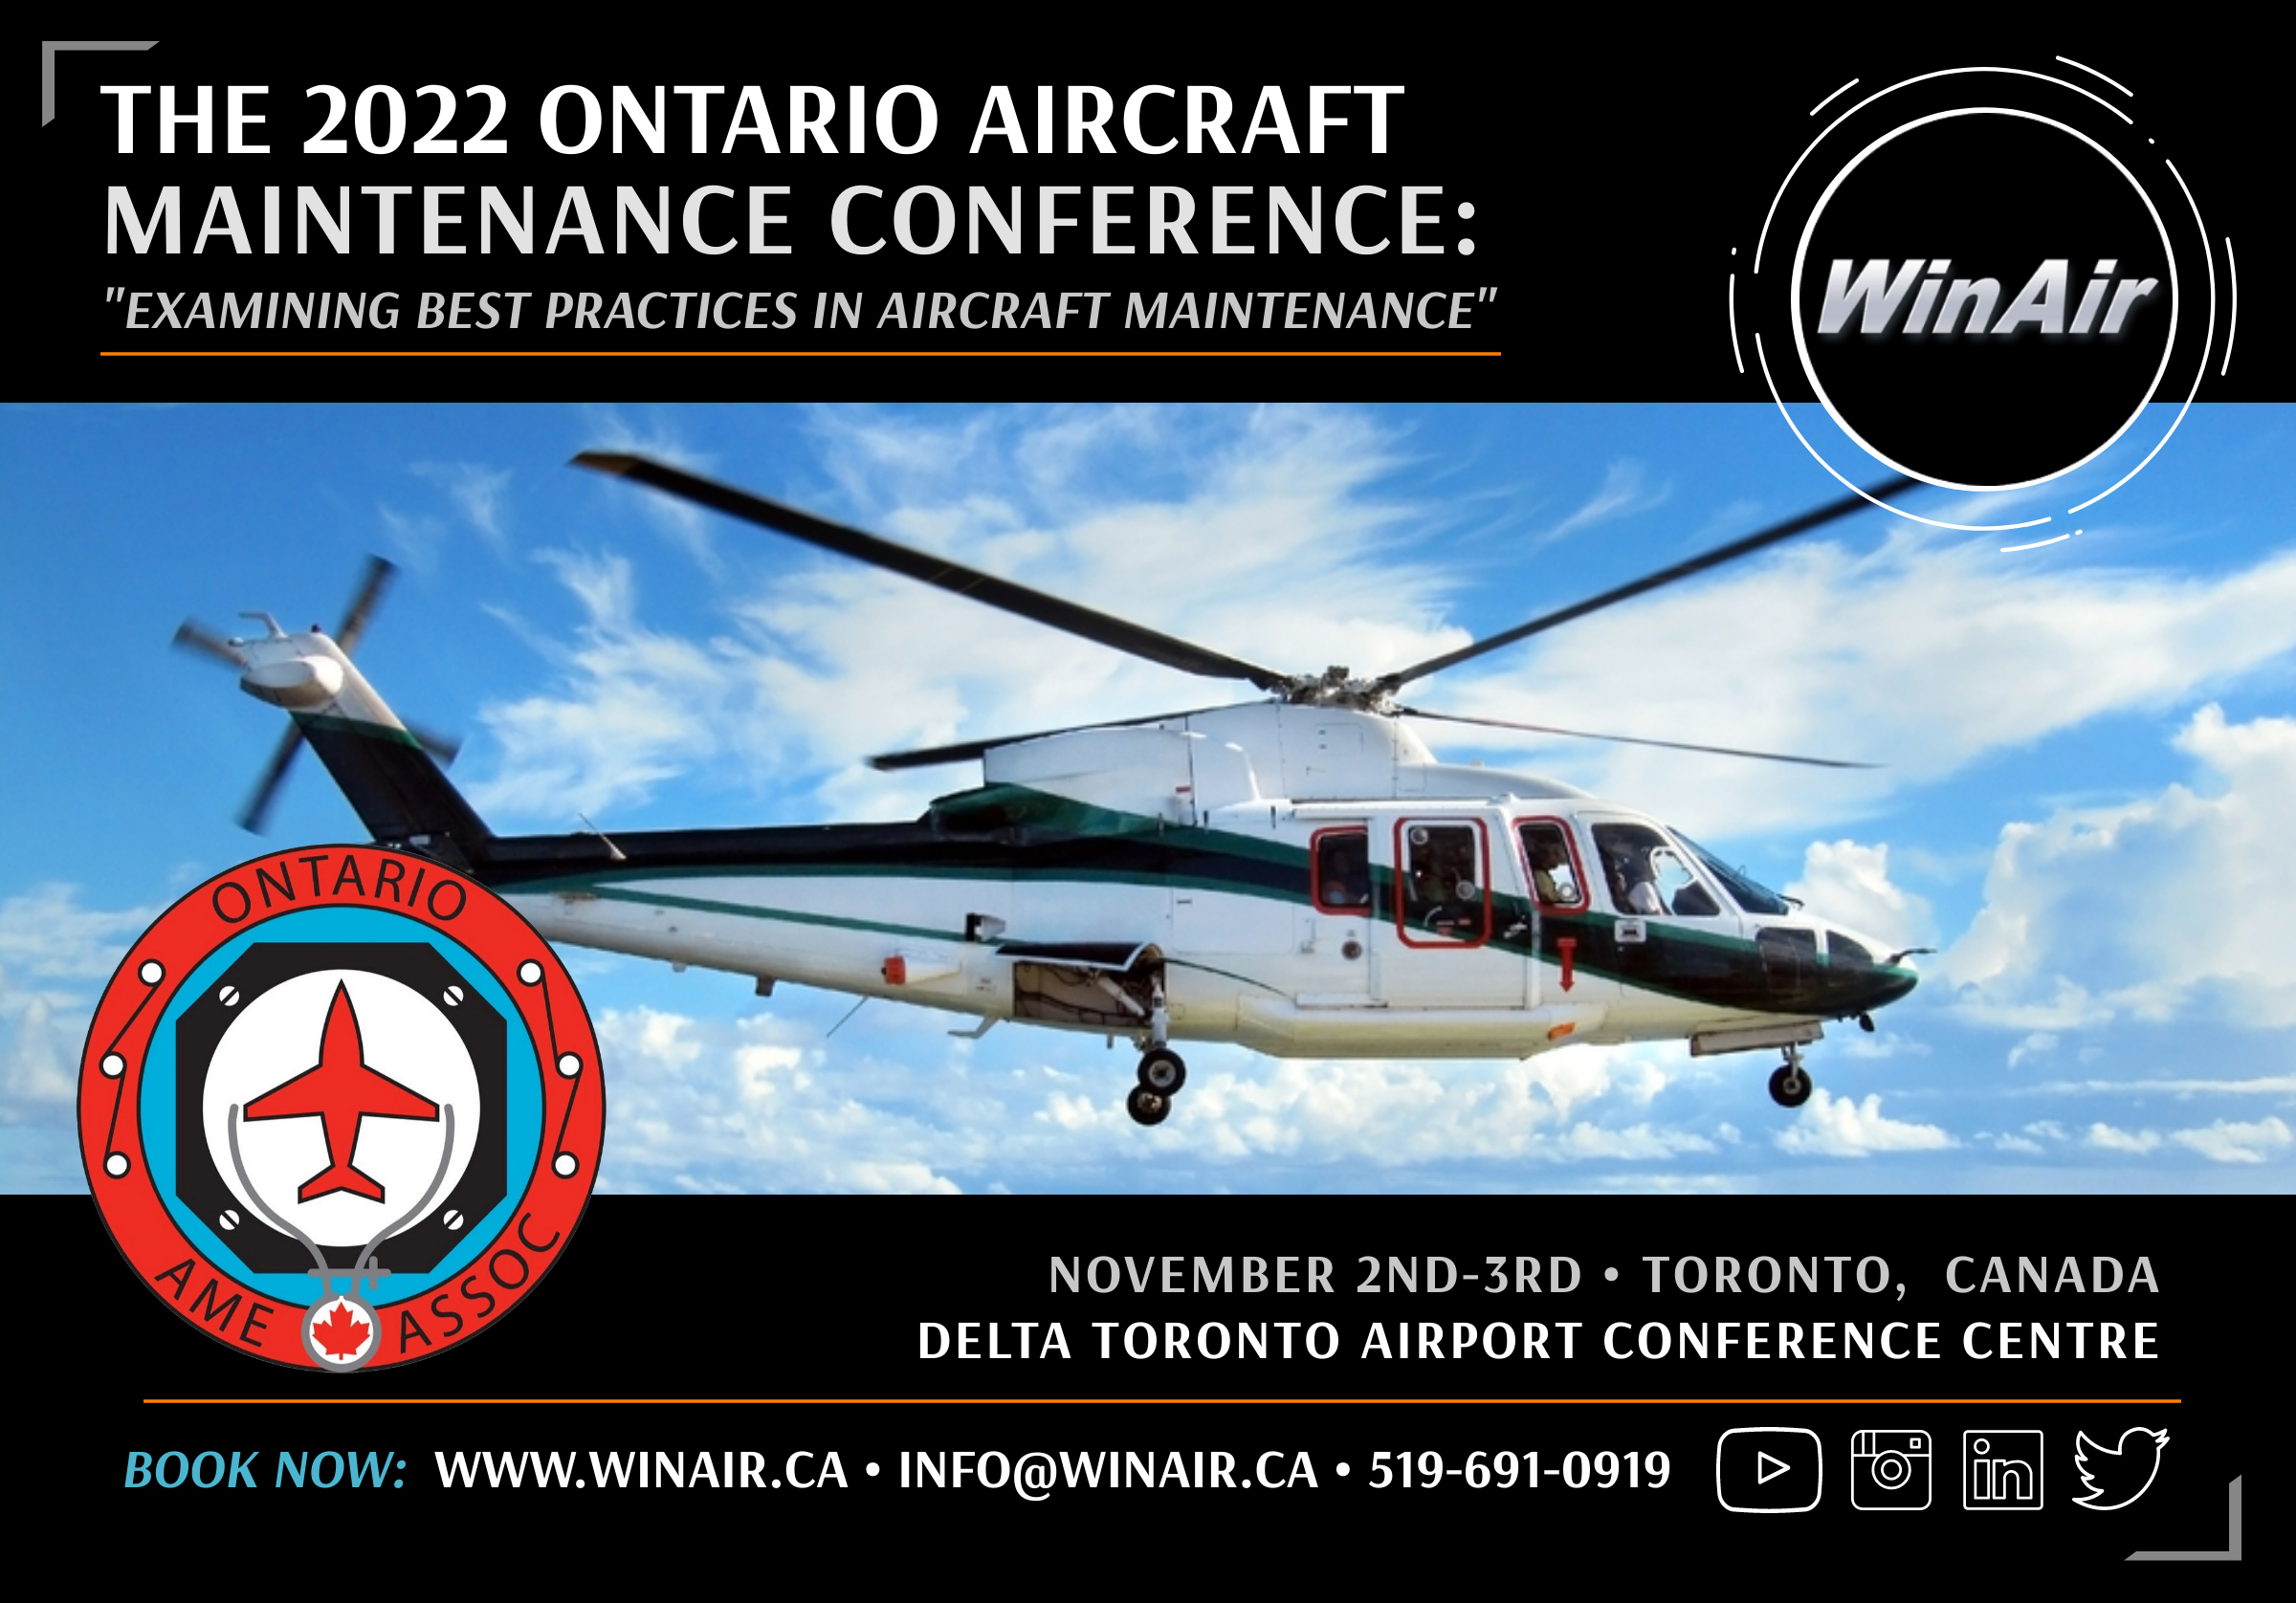 WinAir - The 2022 Ontario Aircraft Maintenance Conference - Press Release Rotary-wing Image